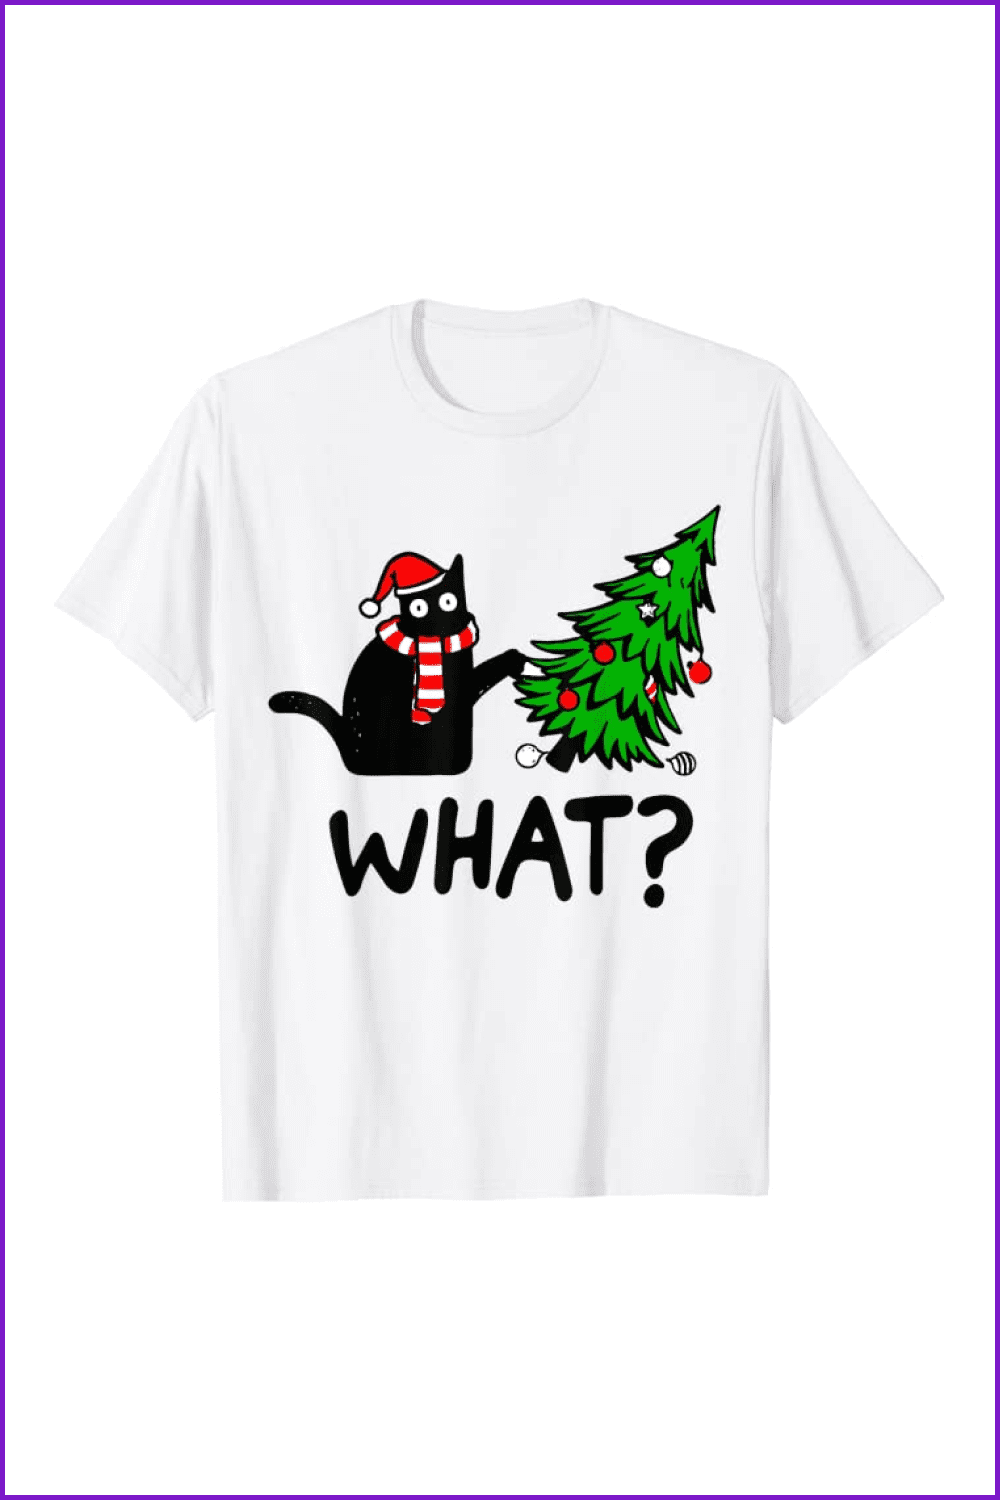 T-shirt with a black cat in a red hat is pushing the tree with lights.